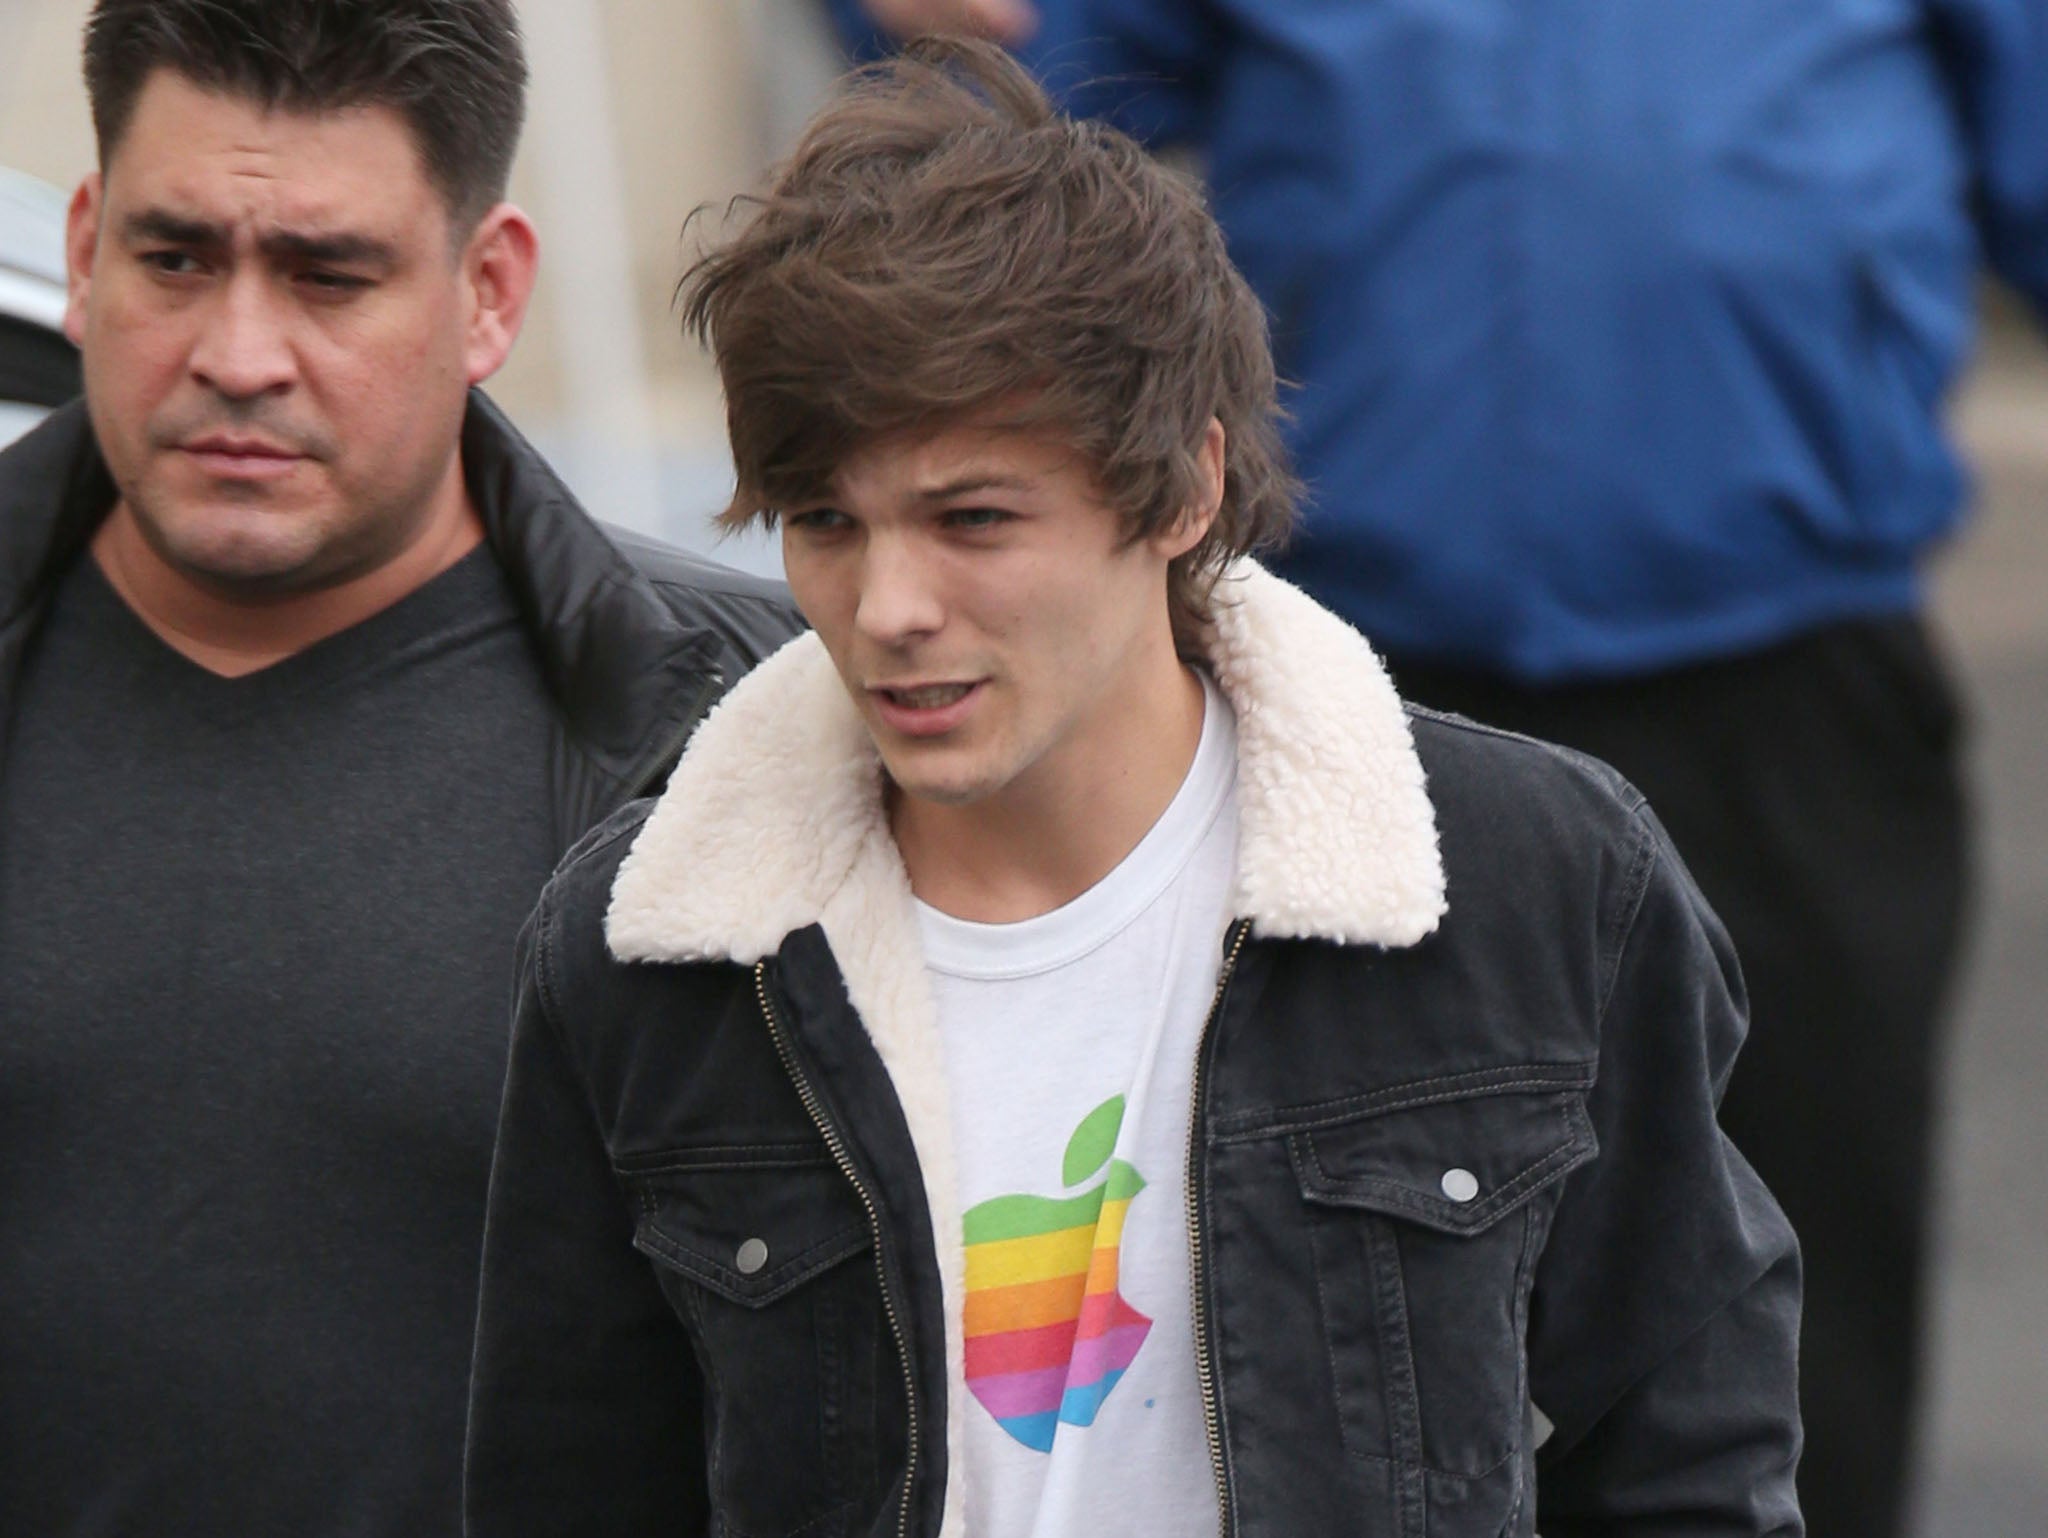 Louis Tomlinson supports gay Apple CEO Tim Cook - days after Harry Styles'  comments on gender and sexuality, The Independent